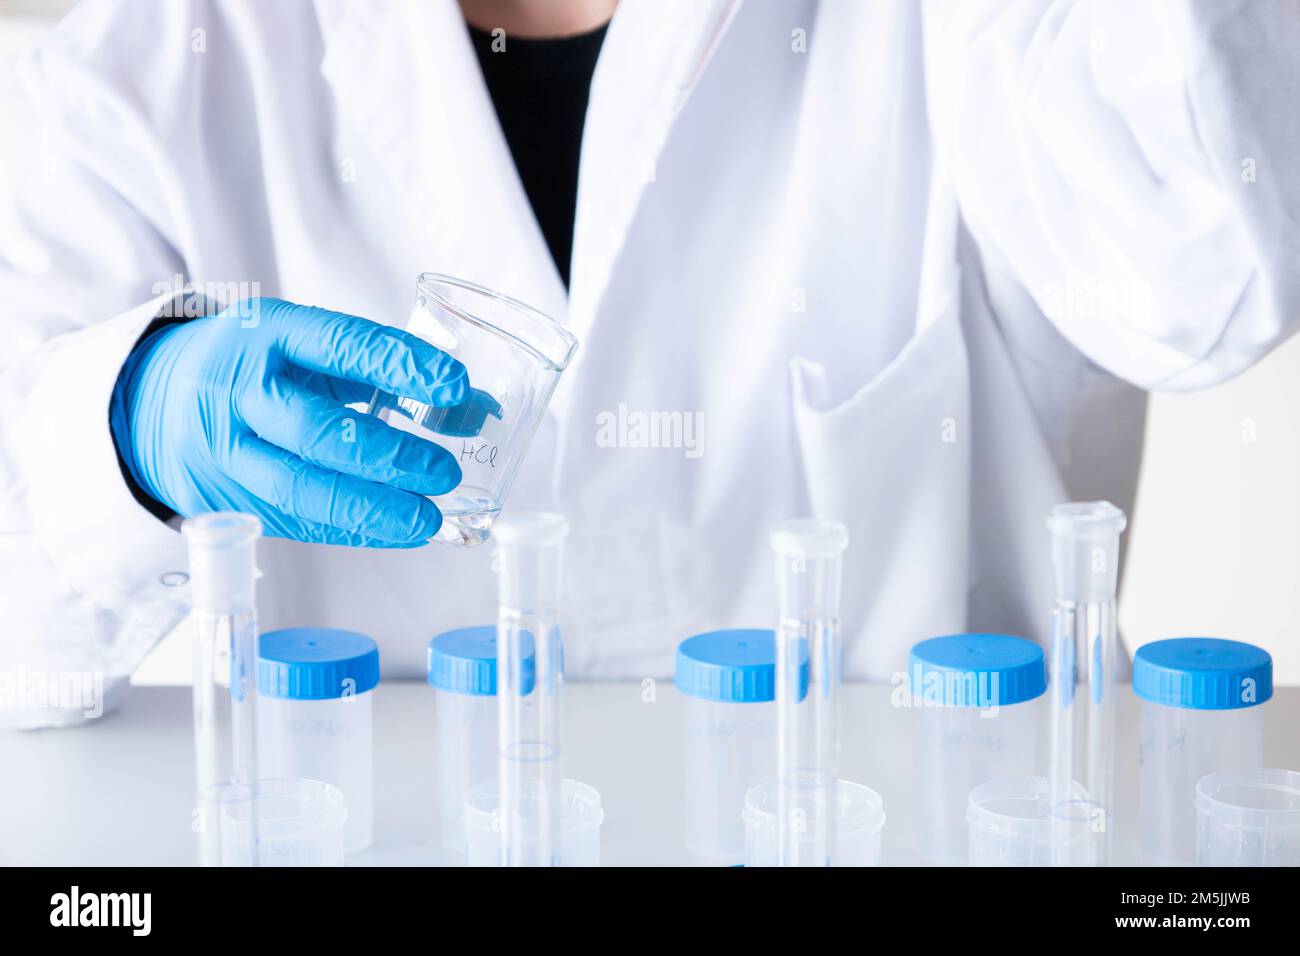 Left handed female scientist analyzing solutions with blue gloves and equipment. Laboratory technician with a pipette. Development and research. Stock Photo